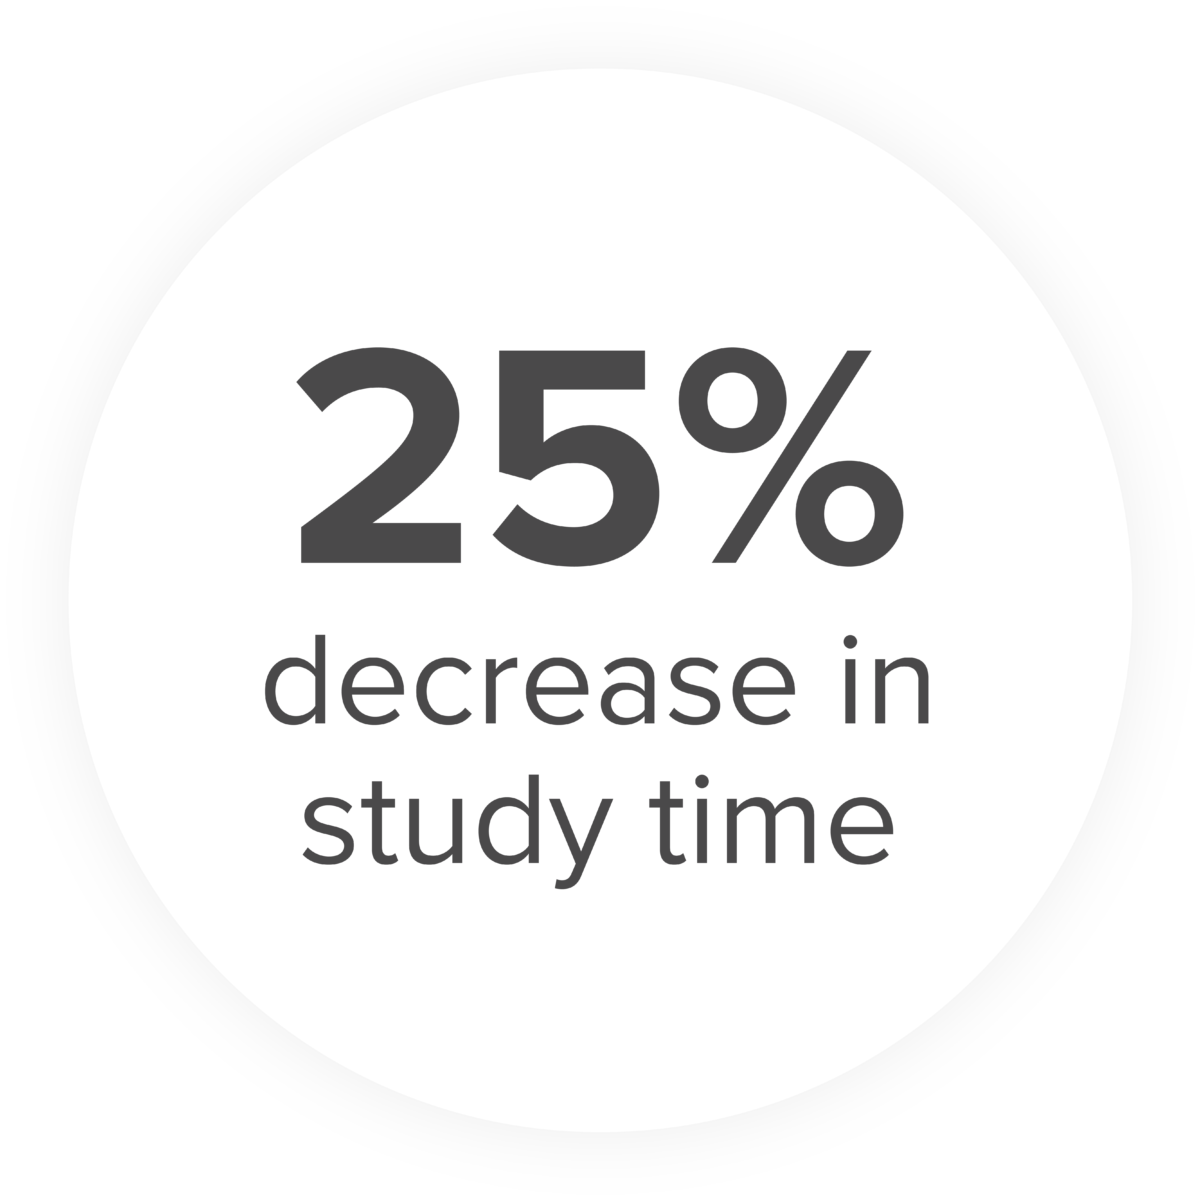 25% decrease in study time image